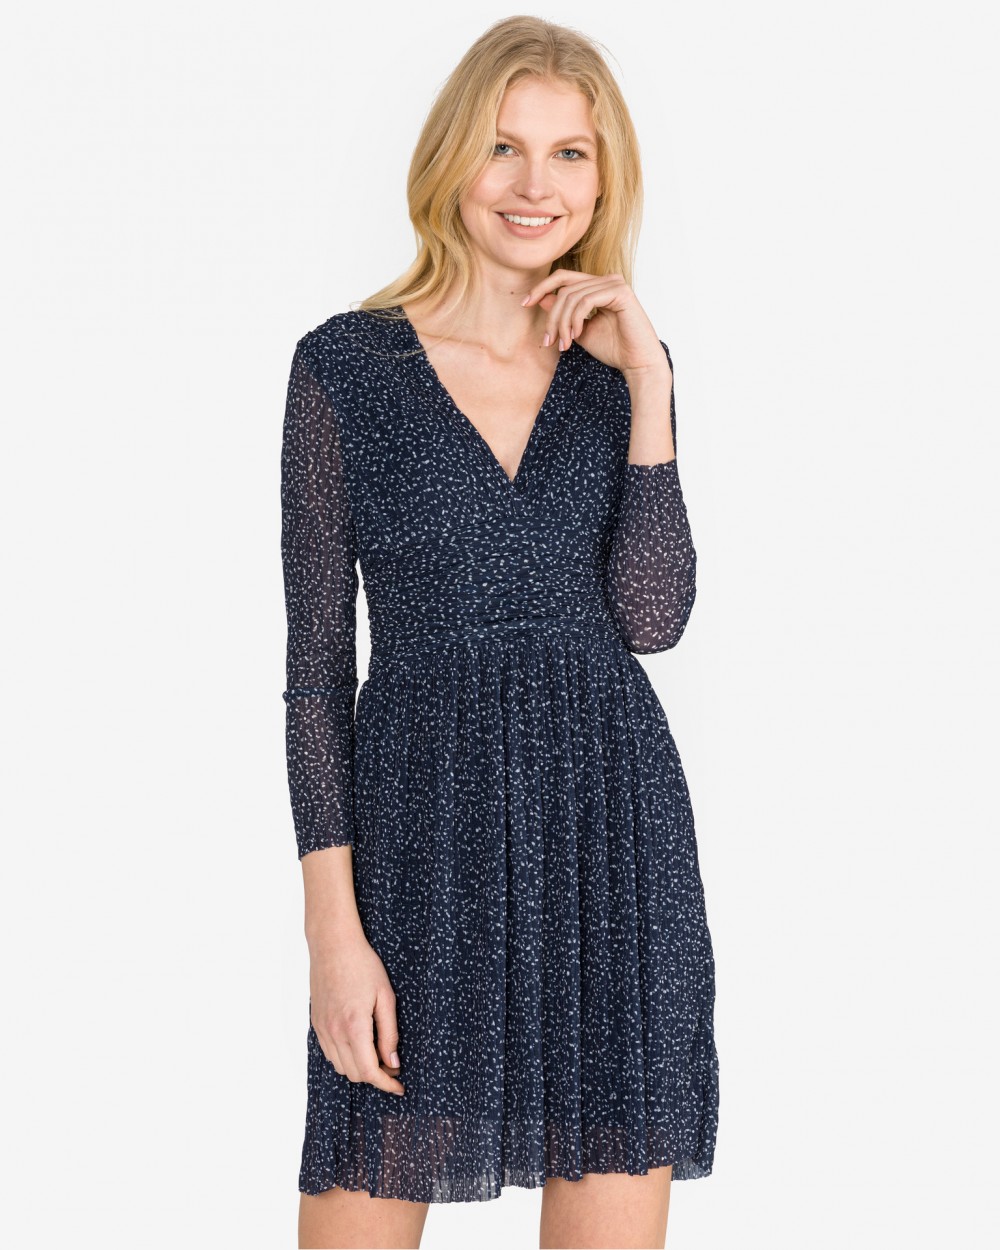 Tabia Dress French Connection